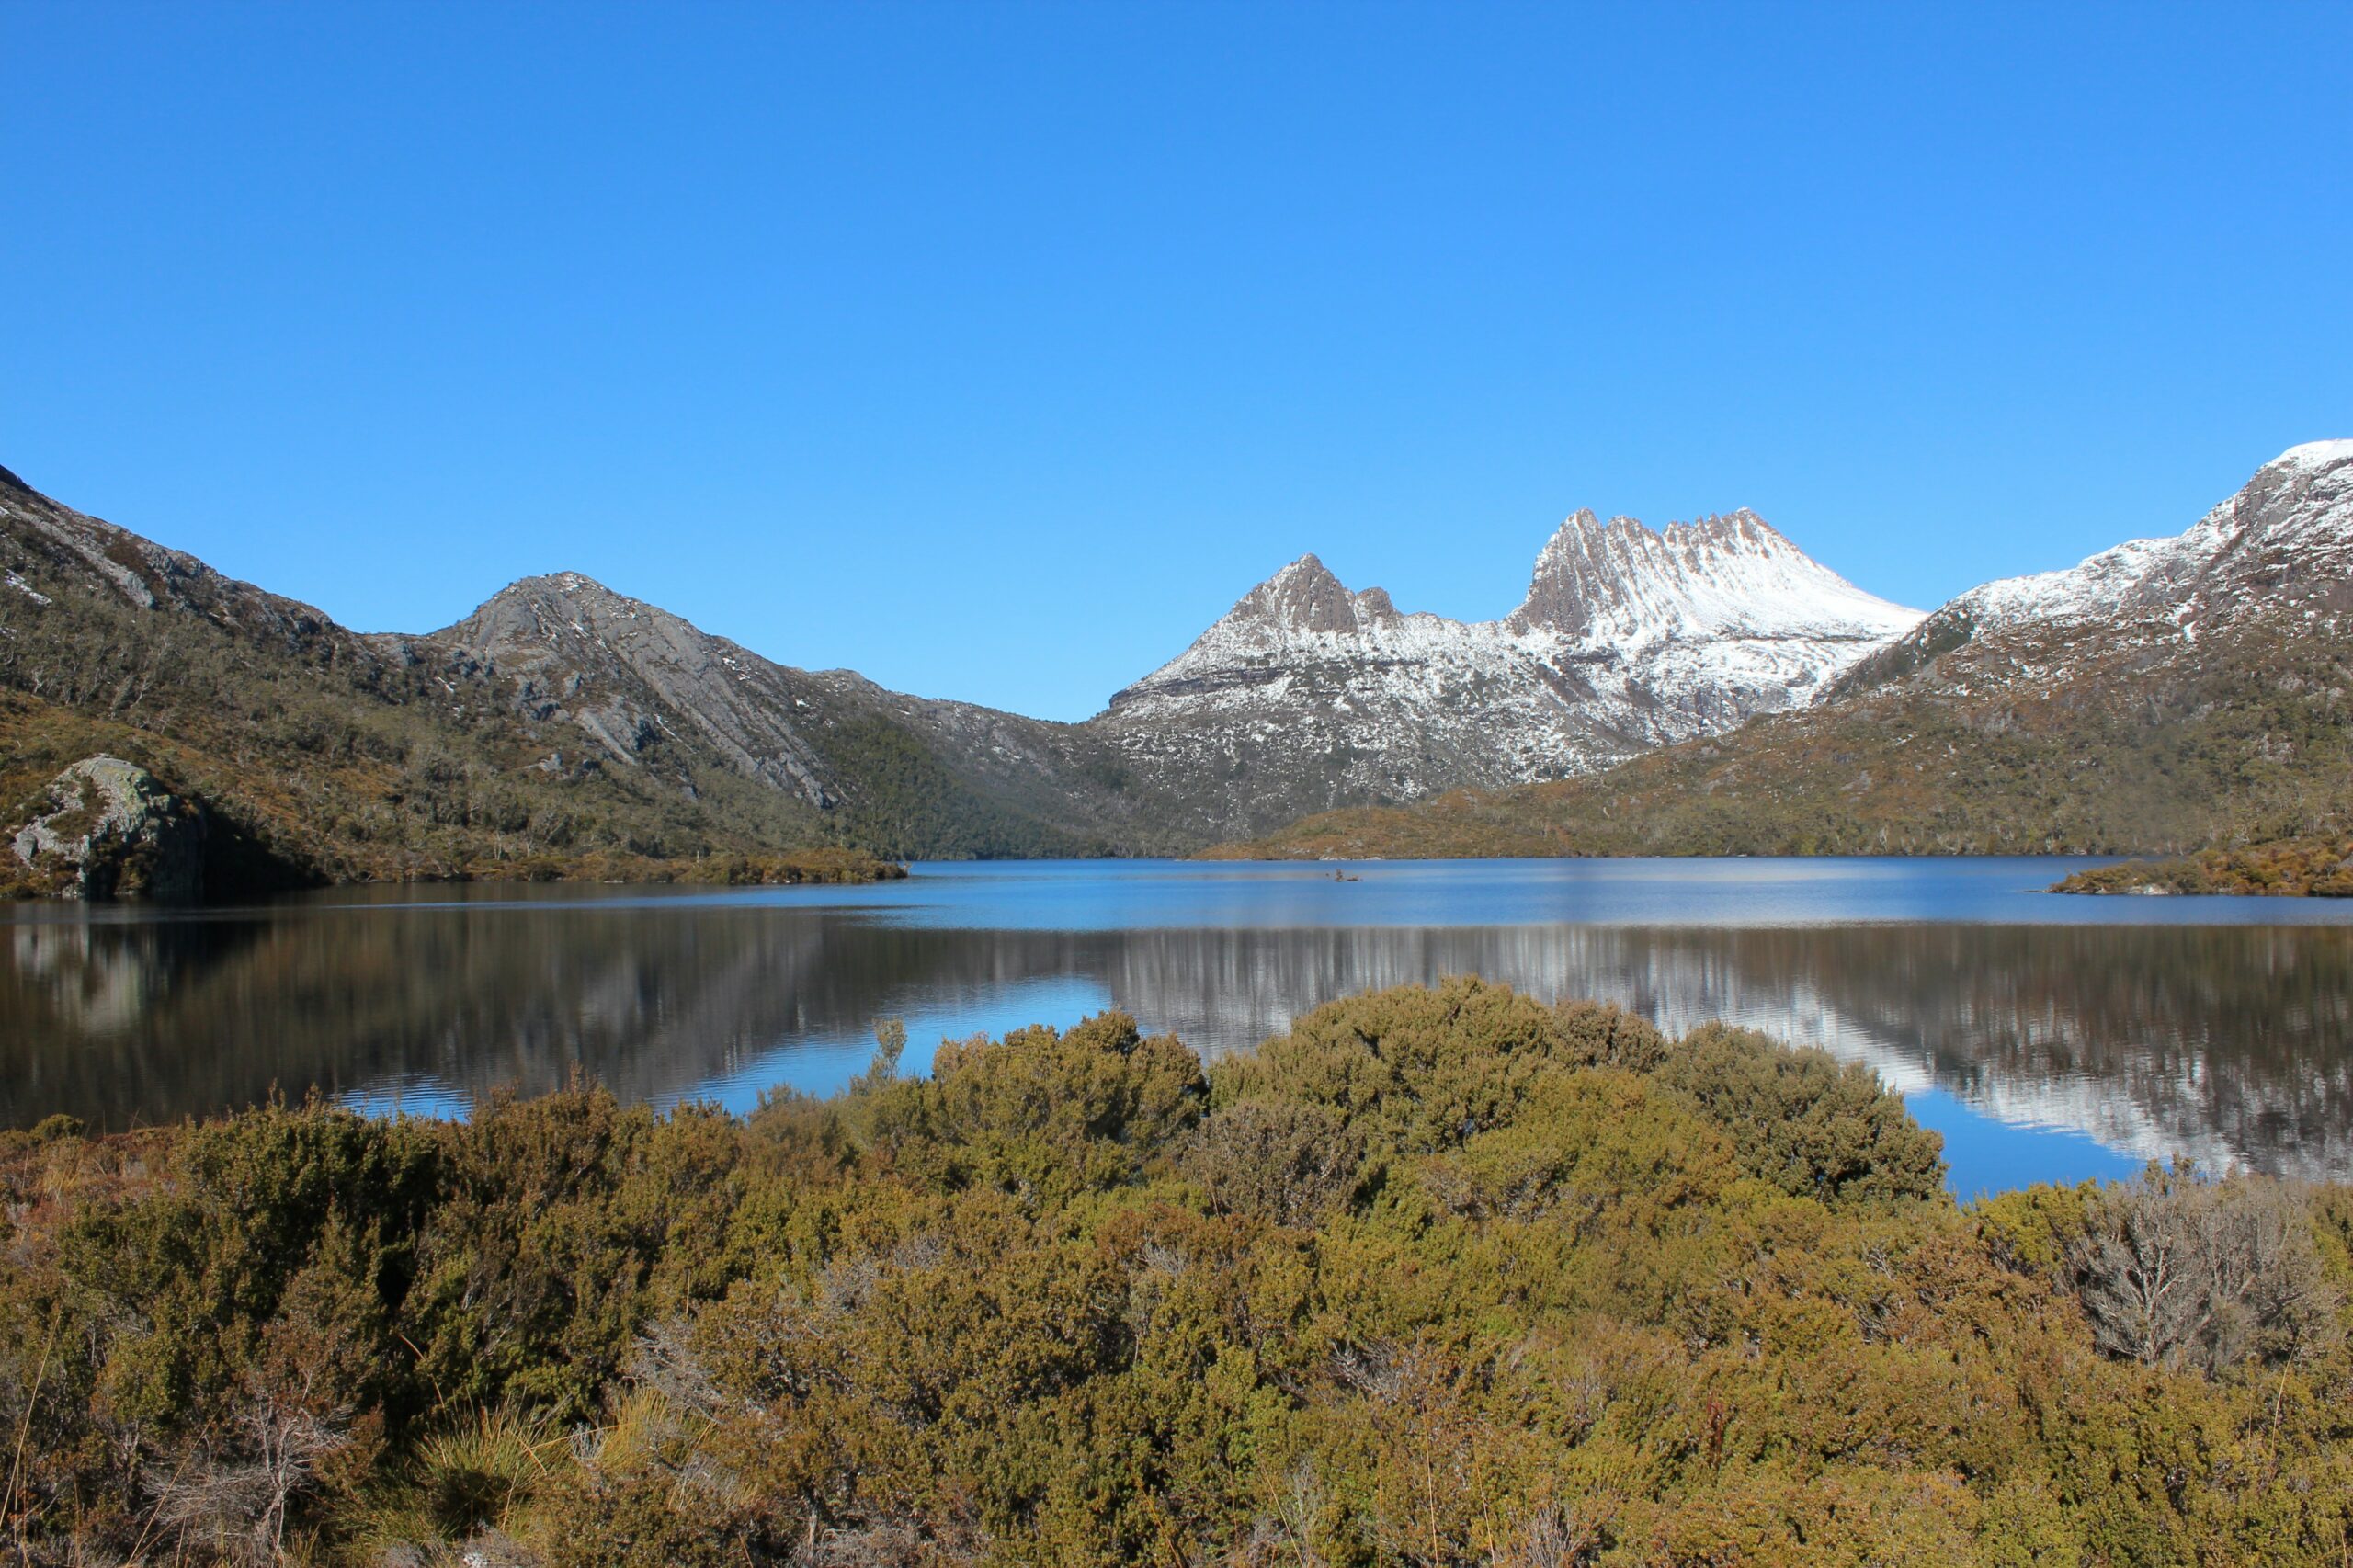 Big Day Out from Hobart to Cradle Mountain